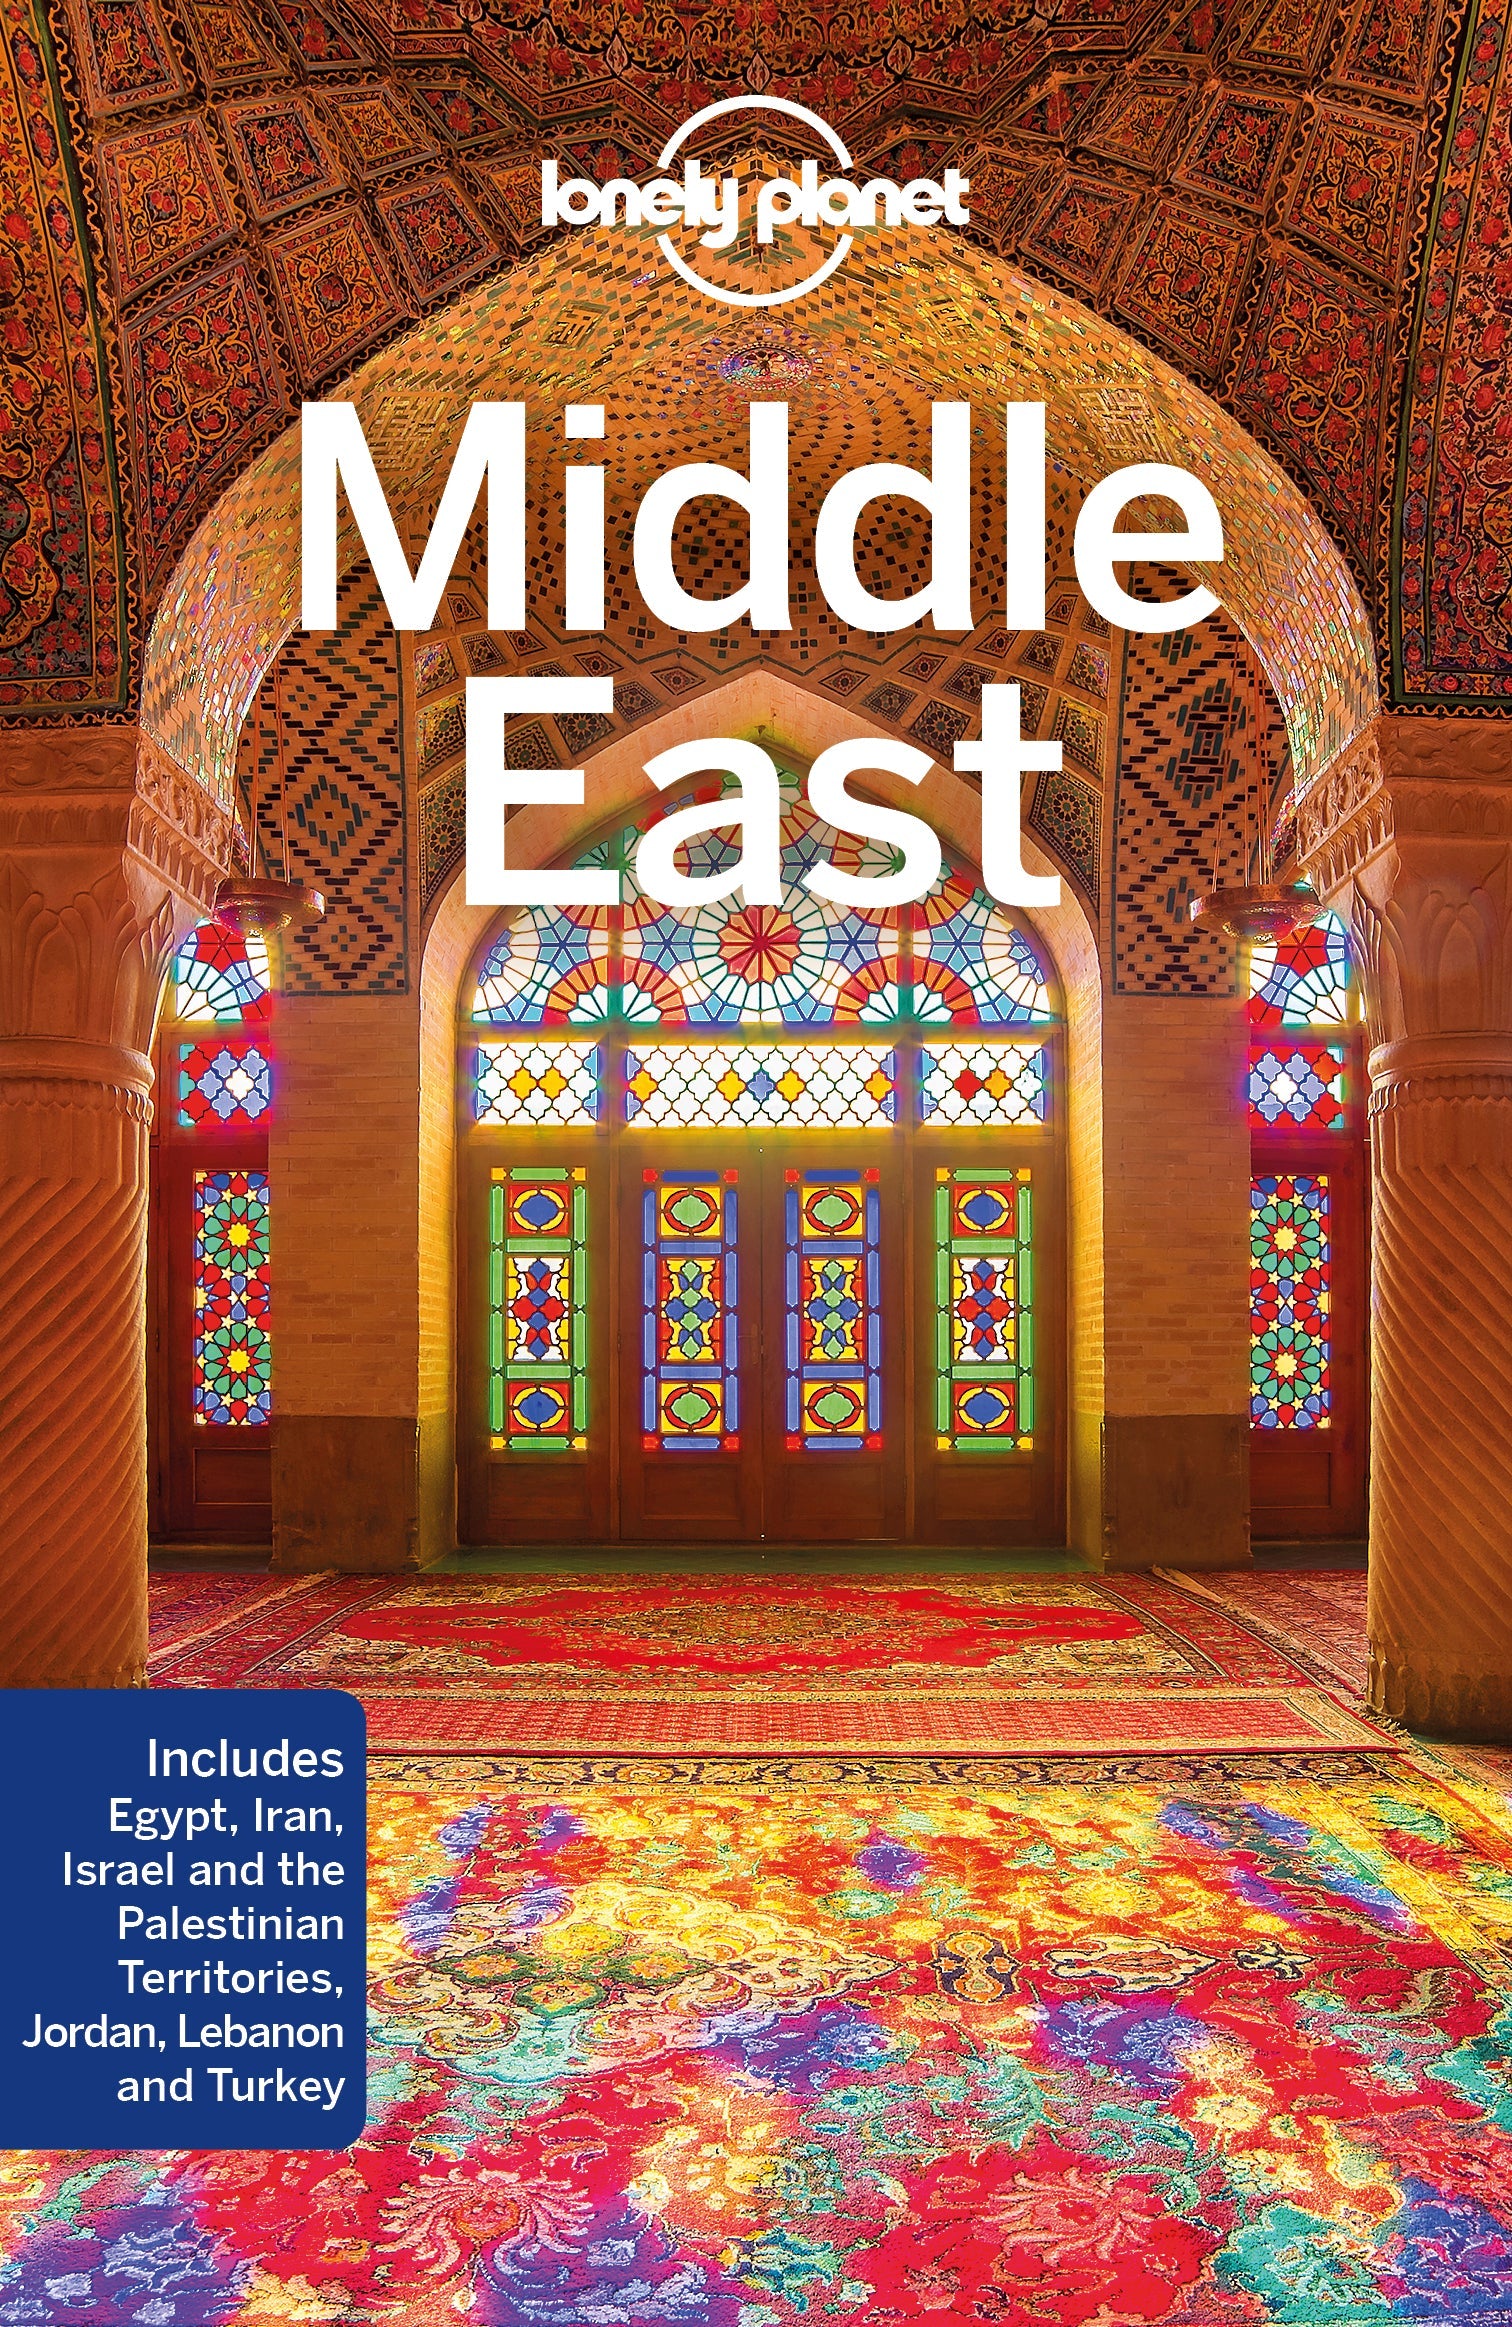 Middle East travel guide